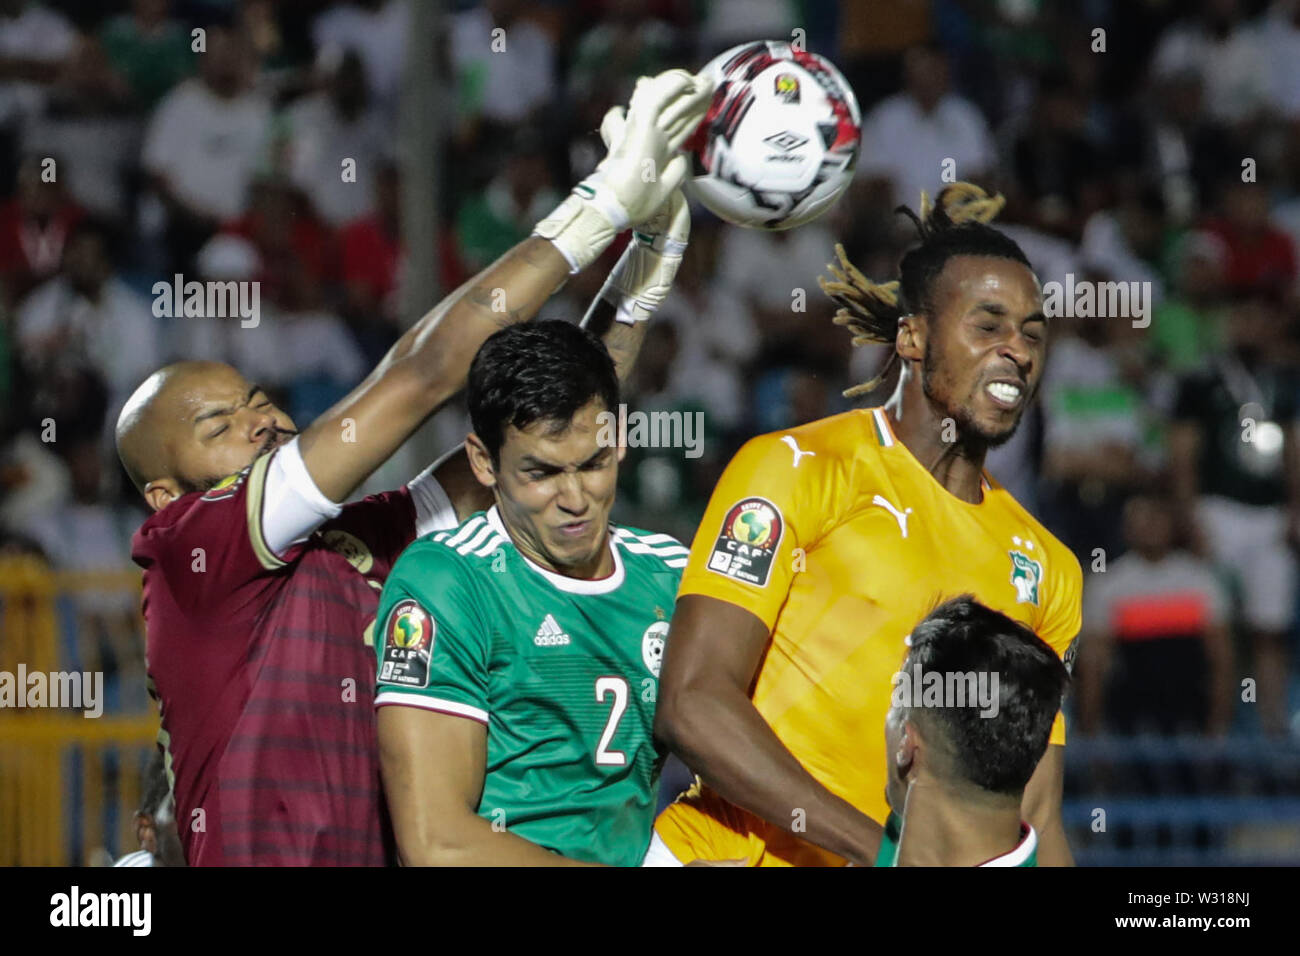 Suez, Egypt. 11th July, 2019. Cote d'Ivoire's Wilfried Zaha (R) battles for the ball with Algeria's Aissa Mandi and Rais M'Bolhi during the 2019 Africa Cup of Nations quarter final soccer match between Cote d'Ivoire and Algeria at the Suez Sports Stadium. Credit: Oliver Weiken/dpa/Alamy Live News Stock Photo